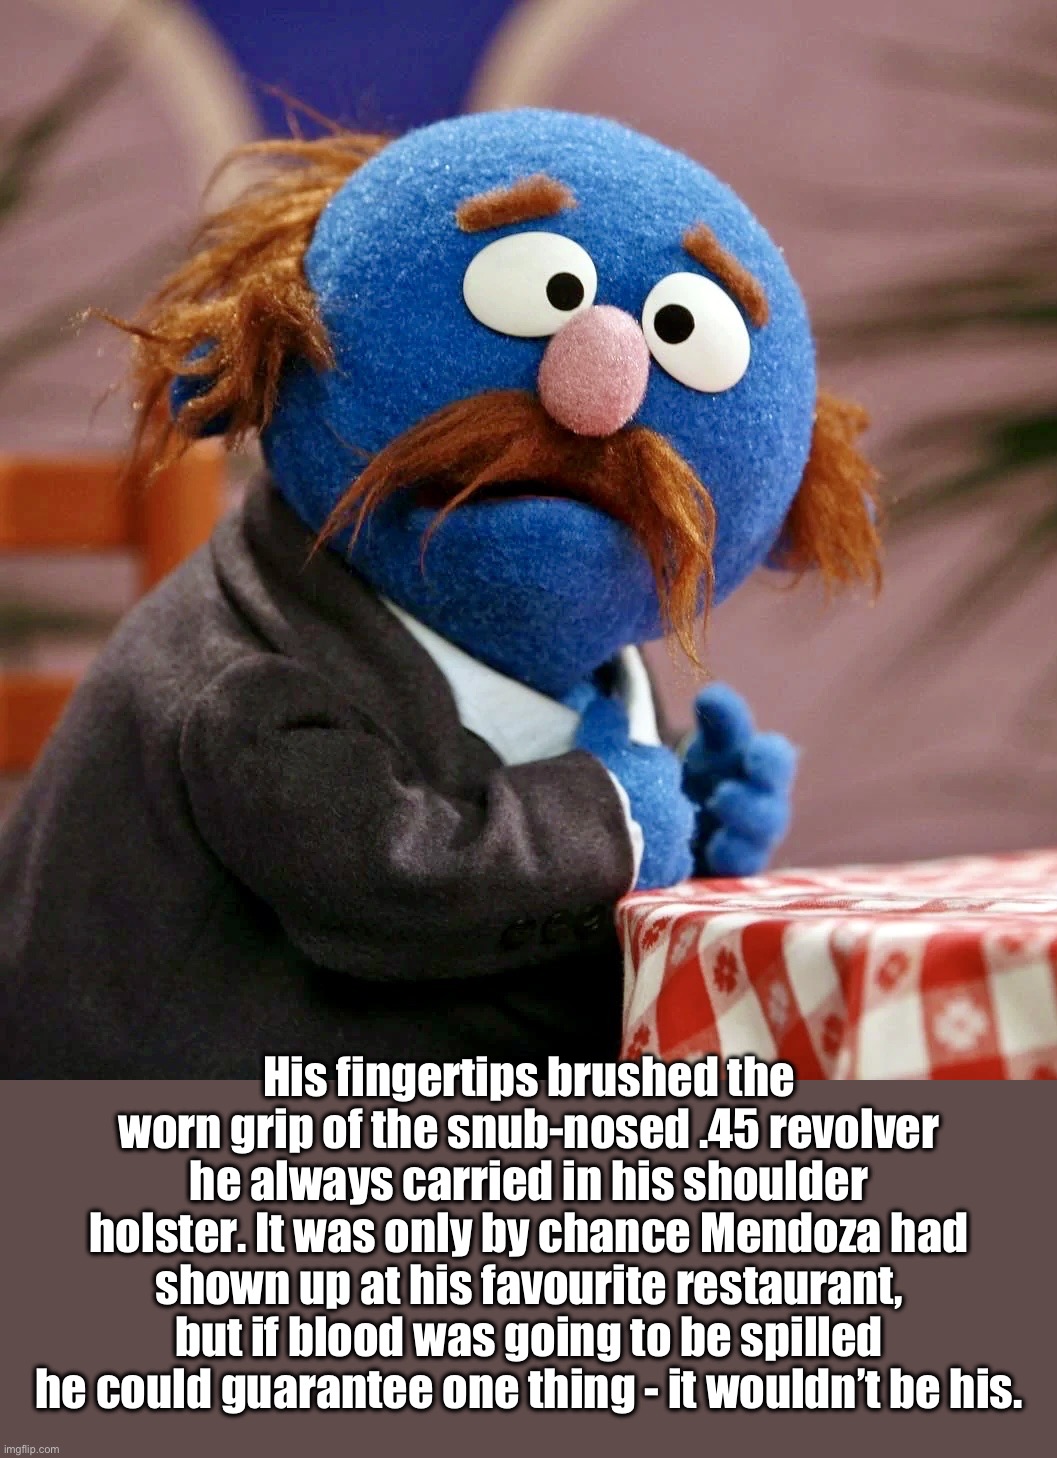 Mean Sesame Streets | His fingertips brushed the worn grip of the snub-nosed .45 revolver he always carried in his shoulder holster. It was only by chance Mendoza had shown up at his favourite restaurant, but if blood was going to be spilled he could guarantee one thing - it wouldn’t be his. | image tagged in sesame street,redux,the godfather,puppet,parody,nonsense | made w/ Imgflip meme maker